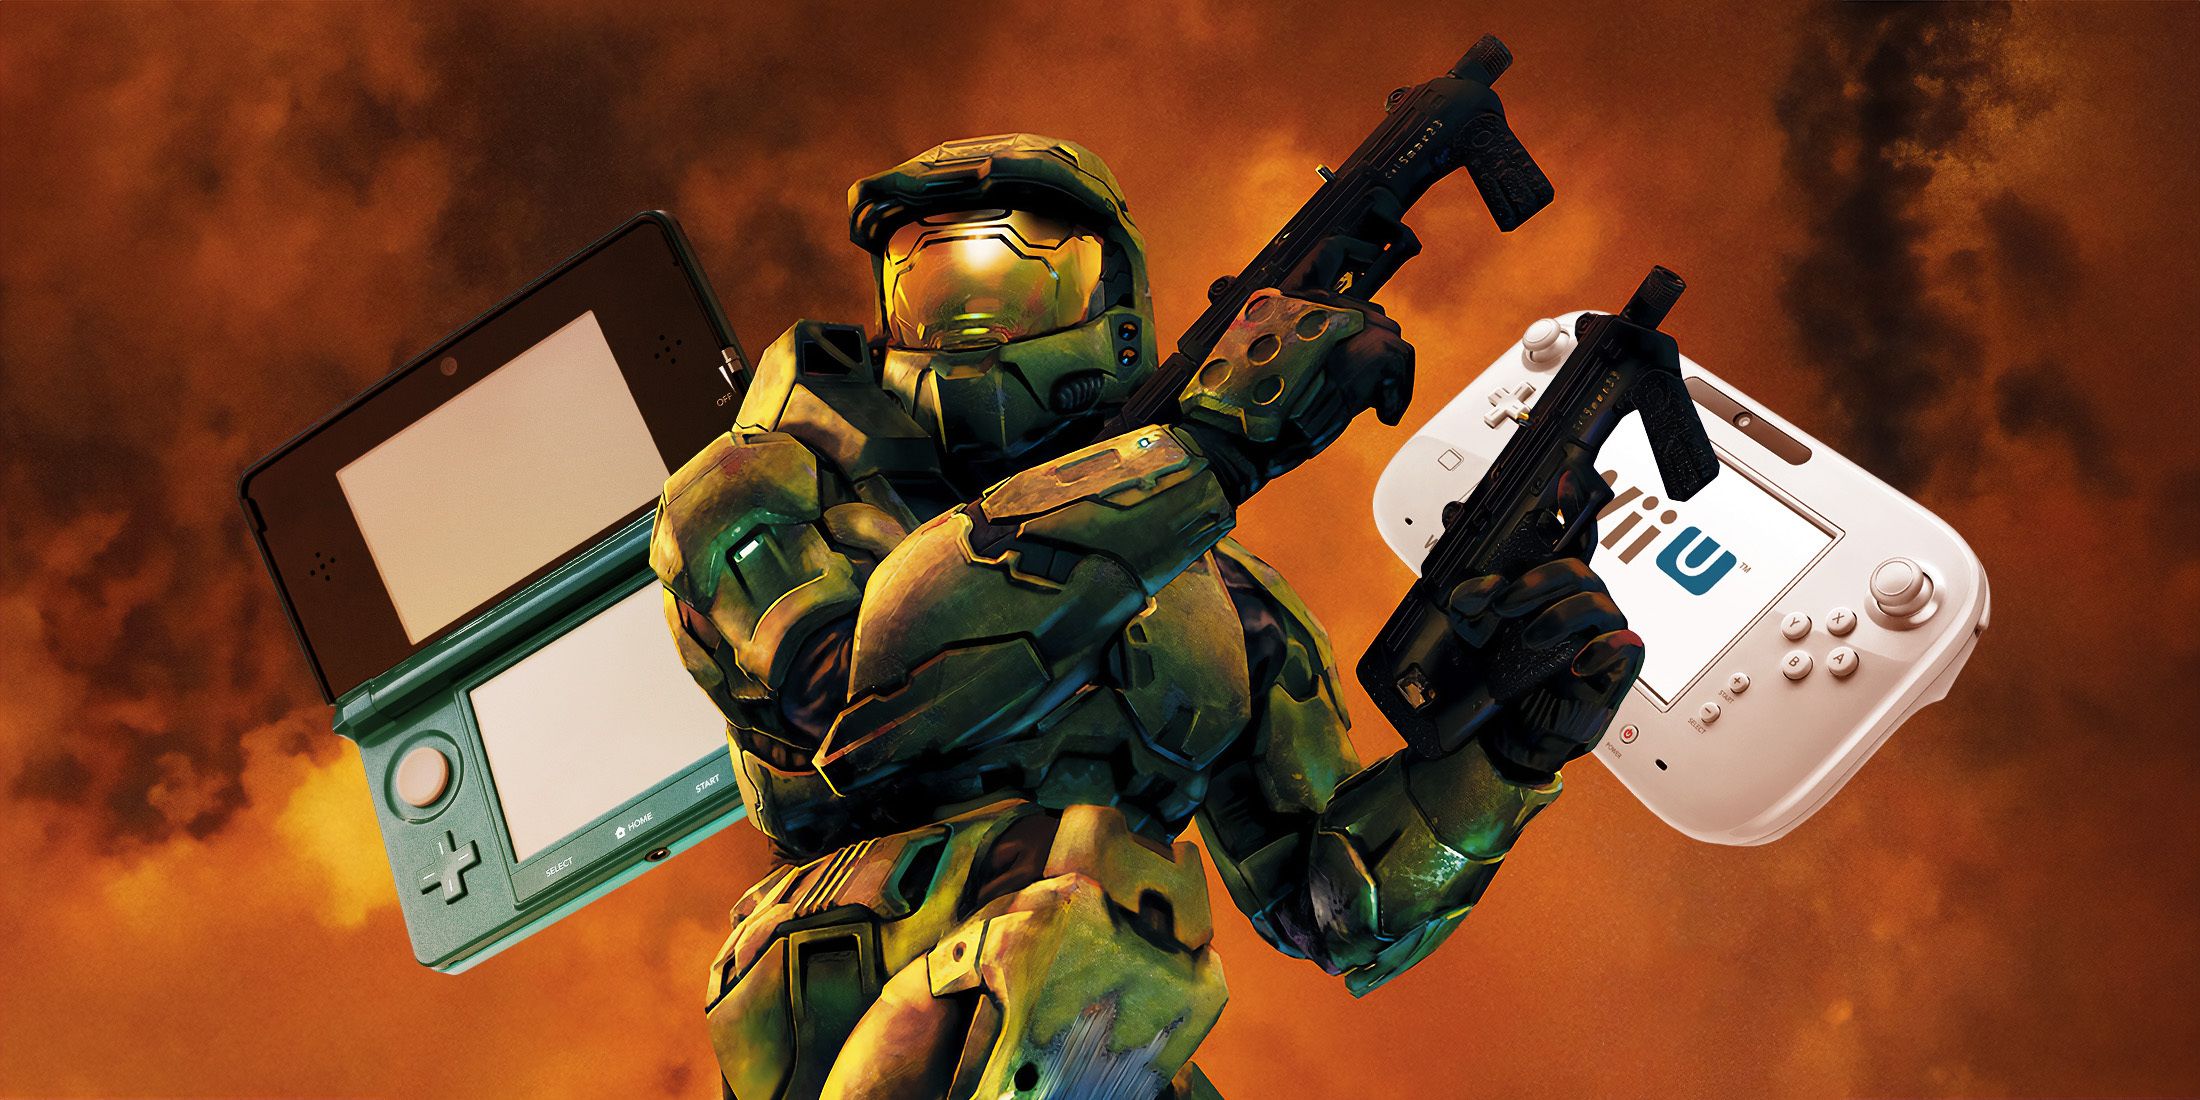 halo 2 record beaten by nintendo gamers after 14 years